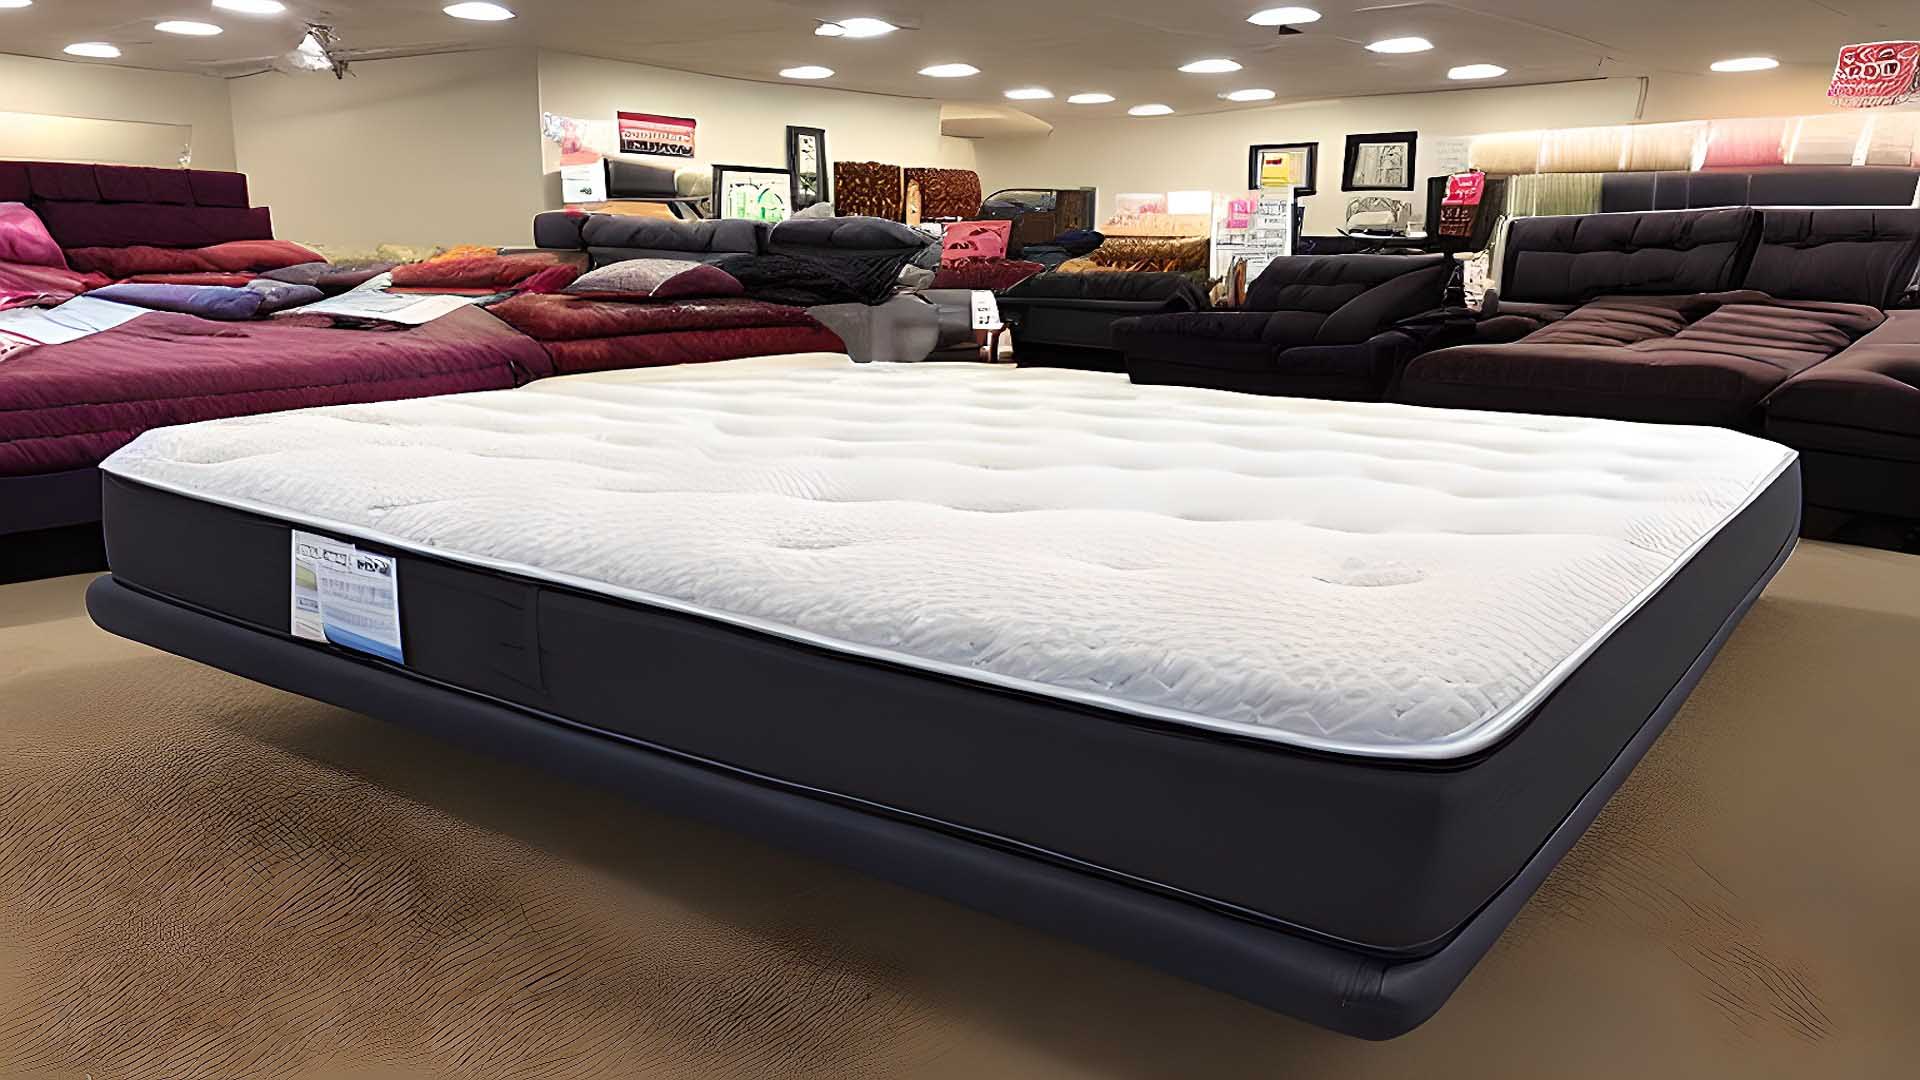 Mattress Sales & Deals in Lakewood, OH